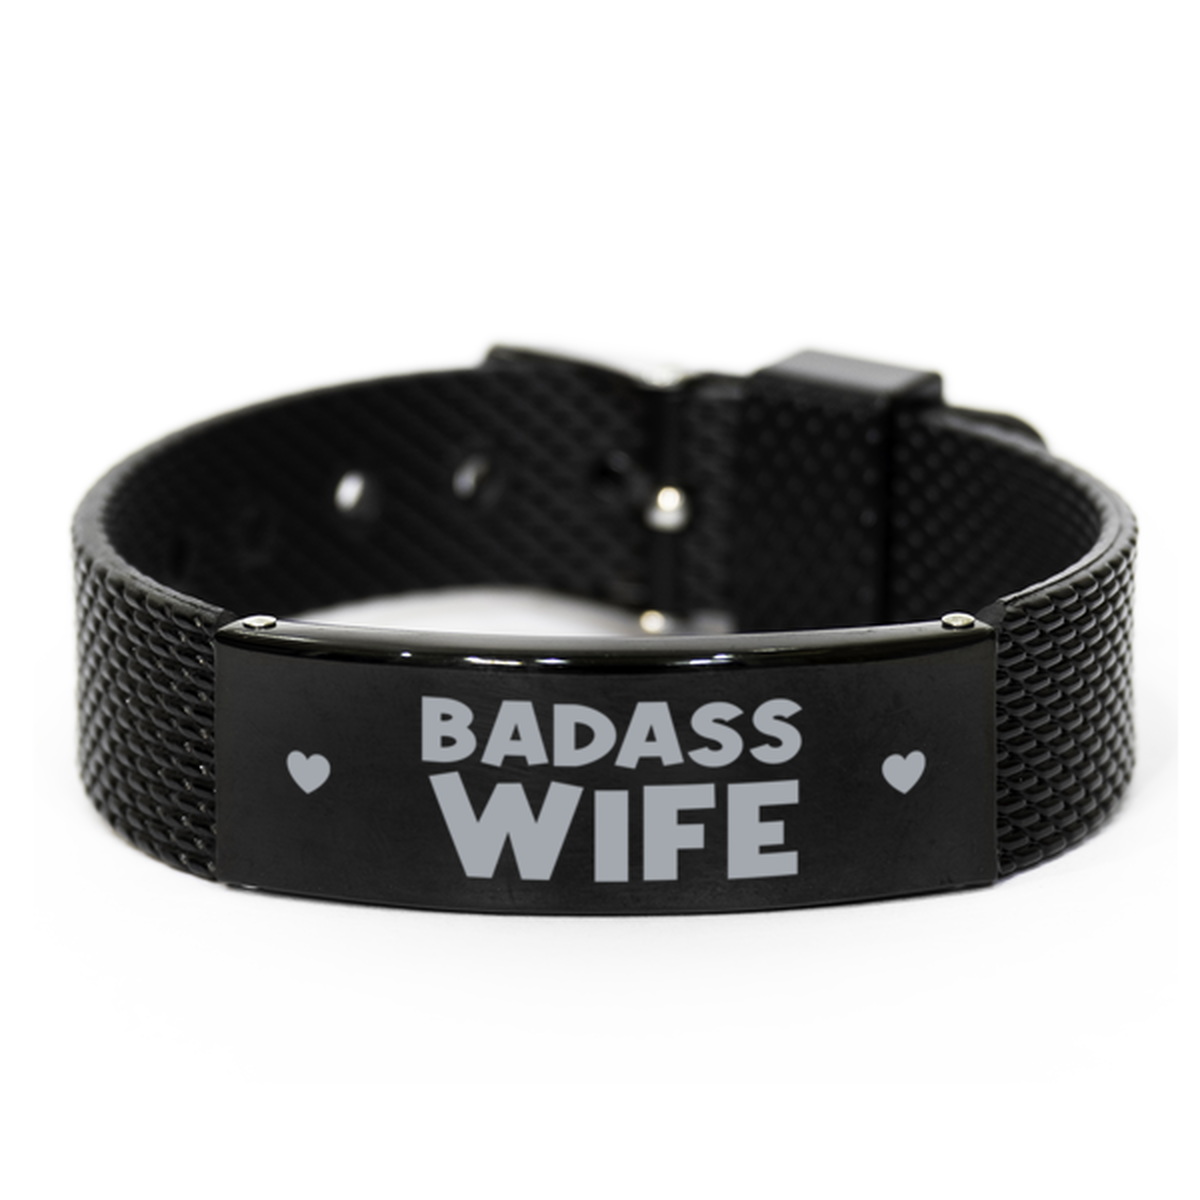 Wife Black Shark Mesh Bracelet, Badass Wife, Funny Family Gifts For Wife From Husband